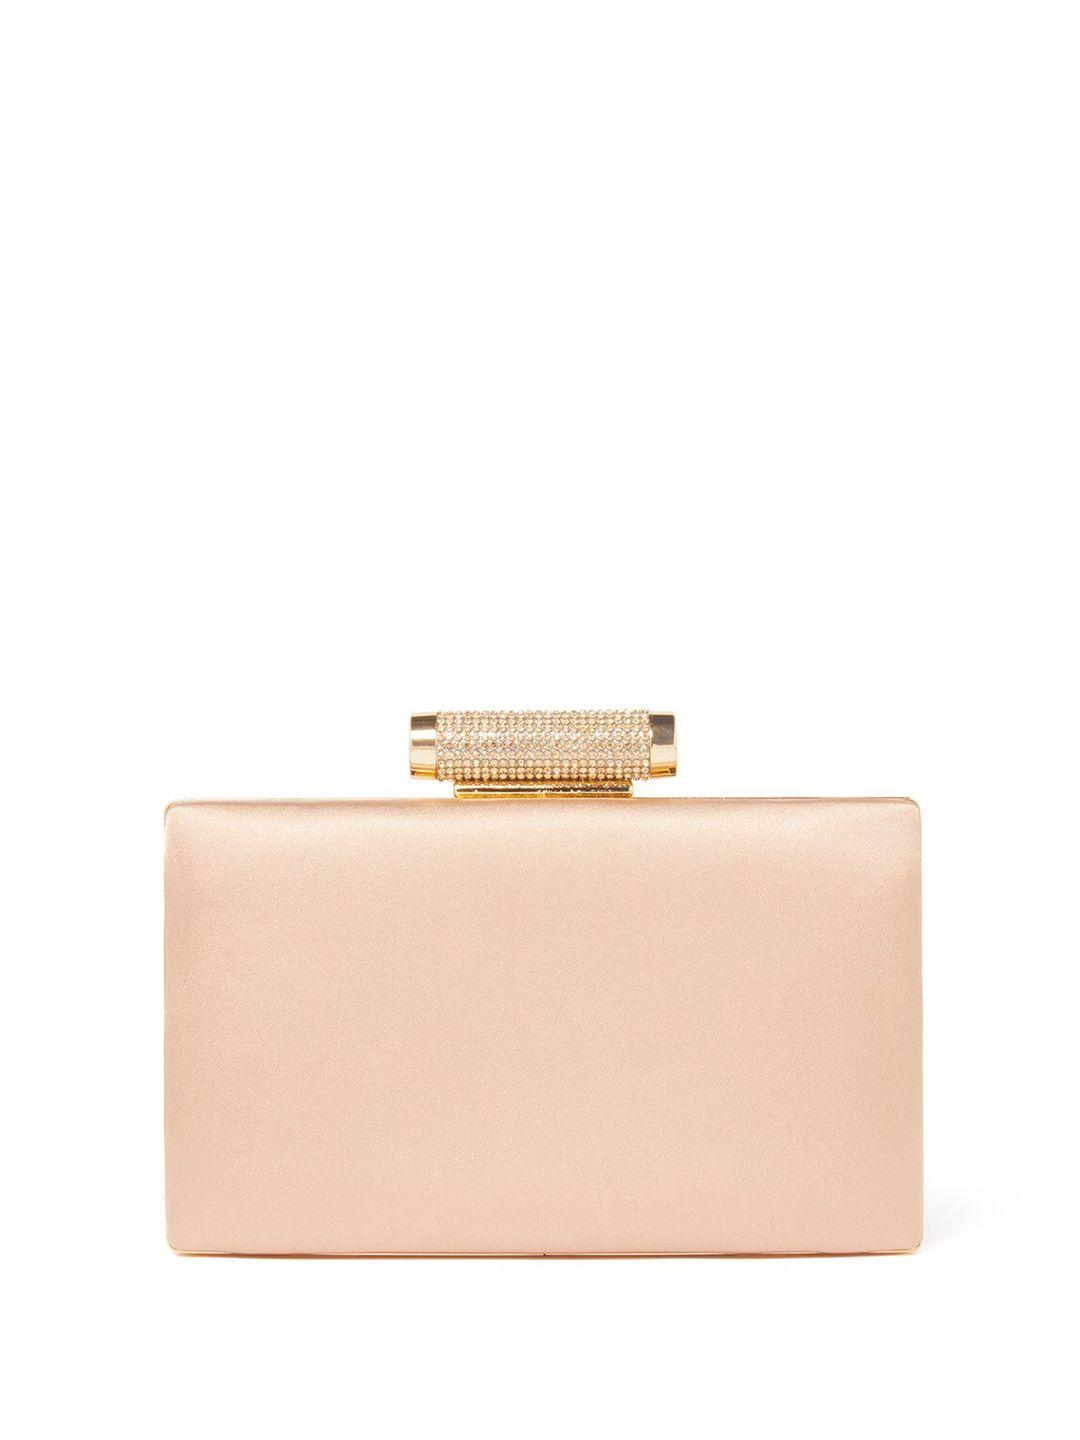 forever new box clutch with shoulder strap